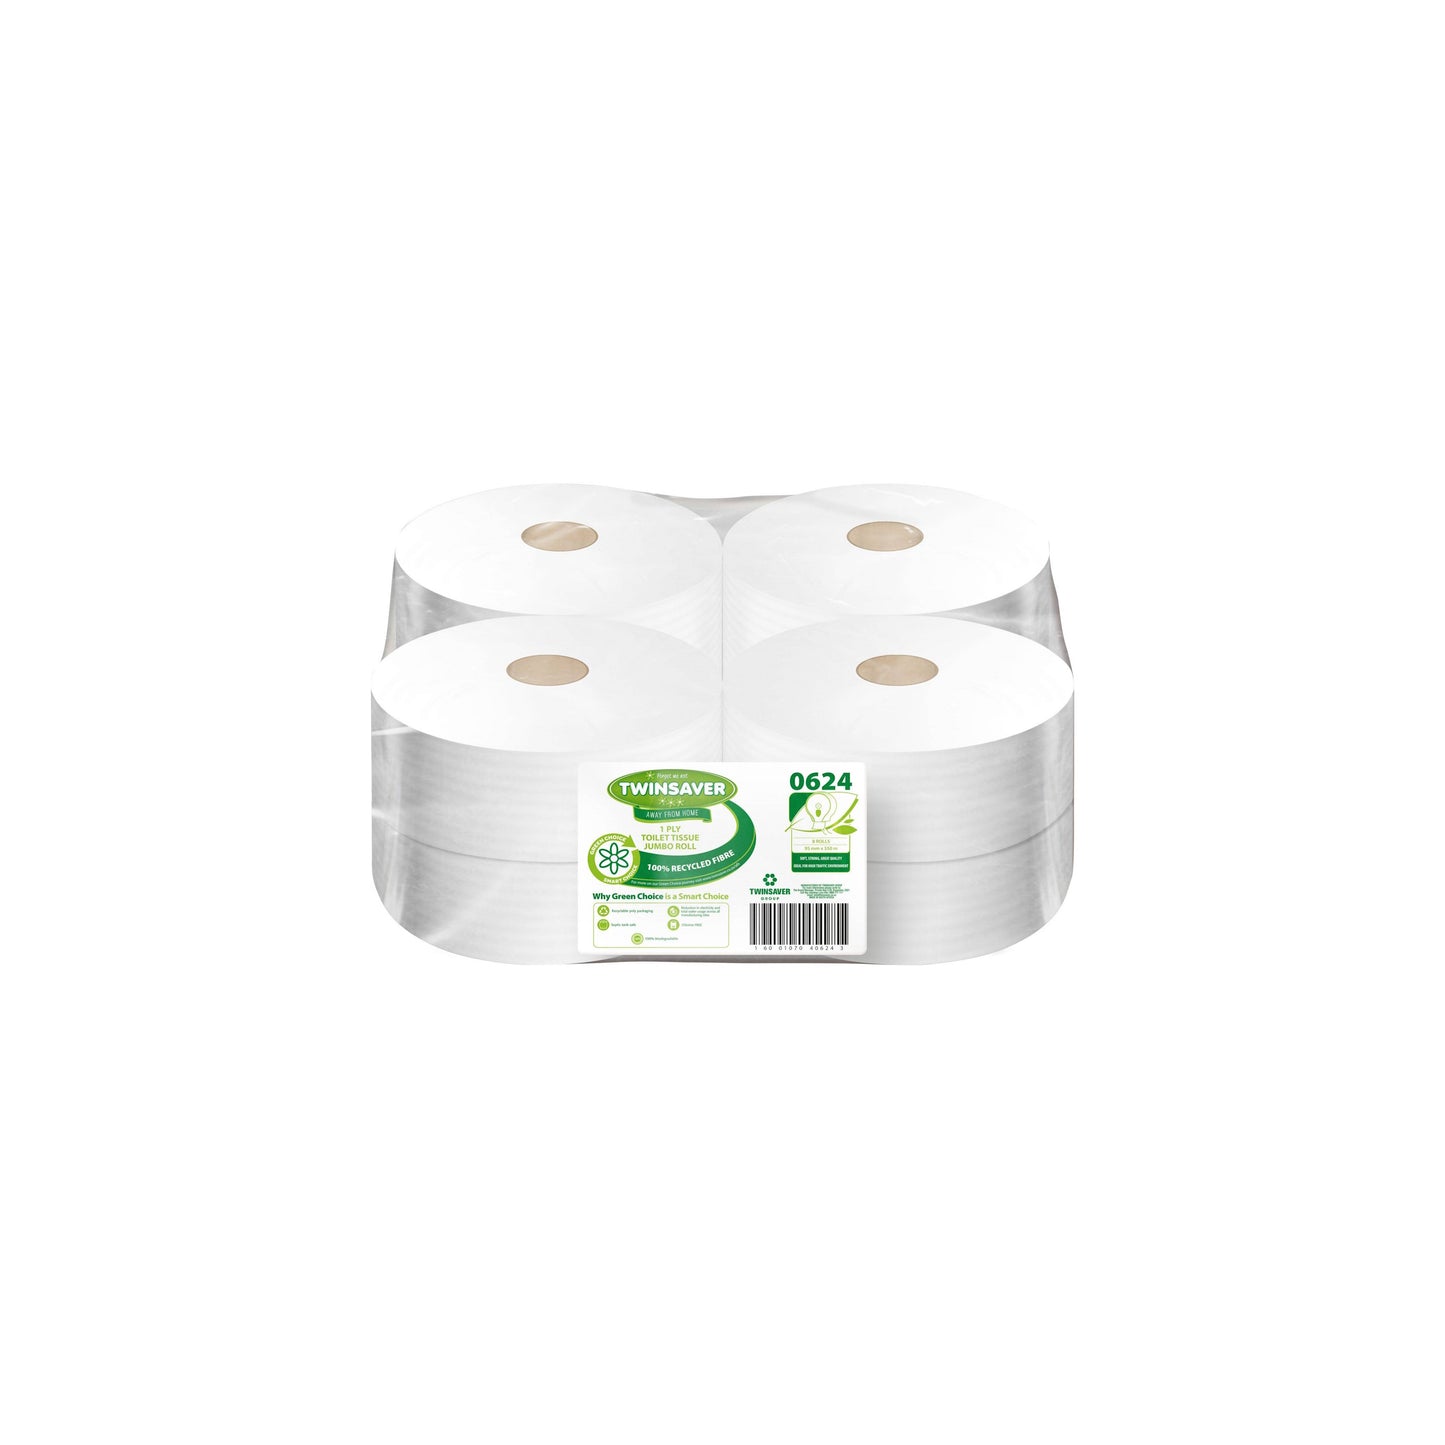 Twinsaver 1 Ply Toilet Paper Jumbo Roll (Pack of 8 Rolls) (Code 0624)